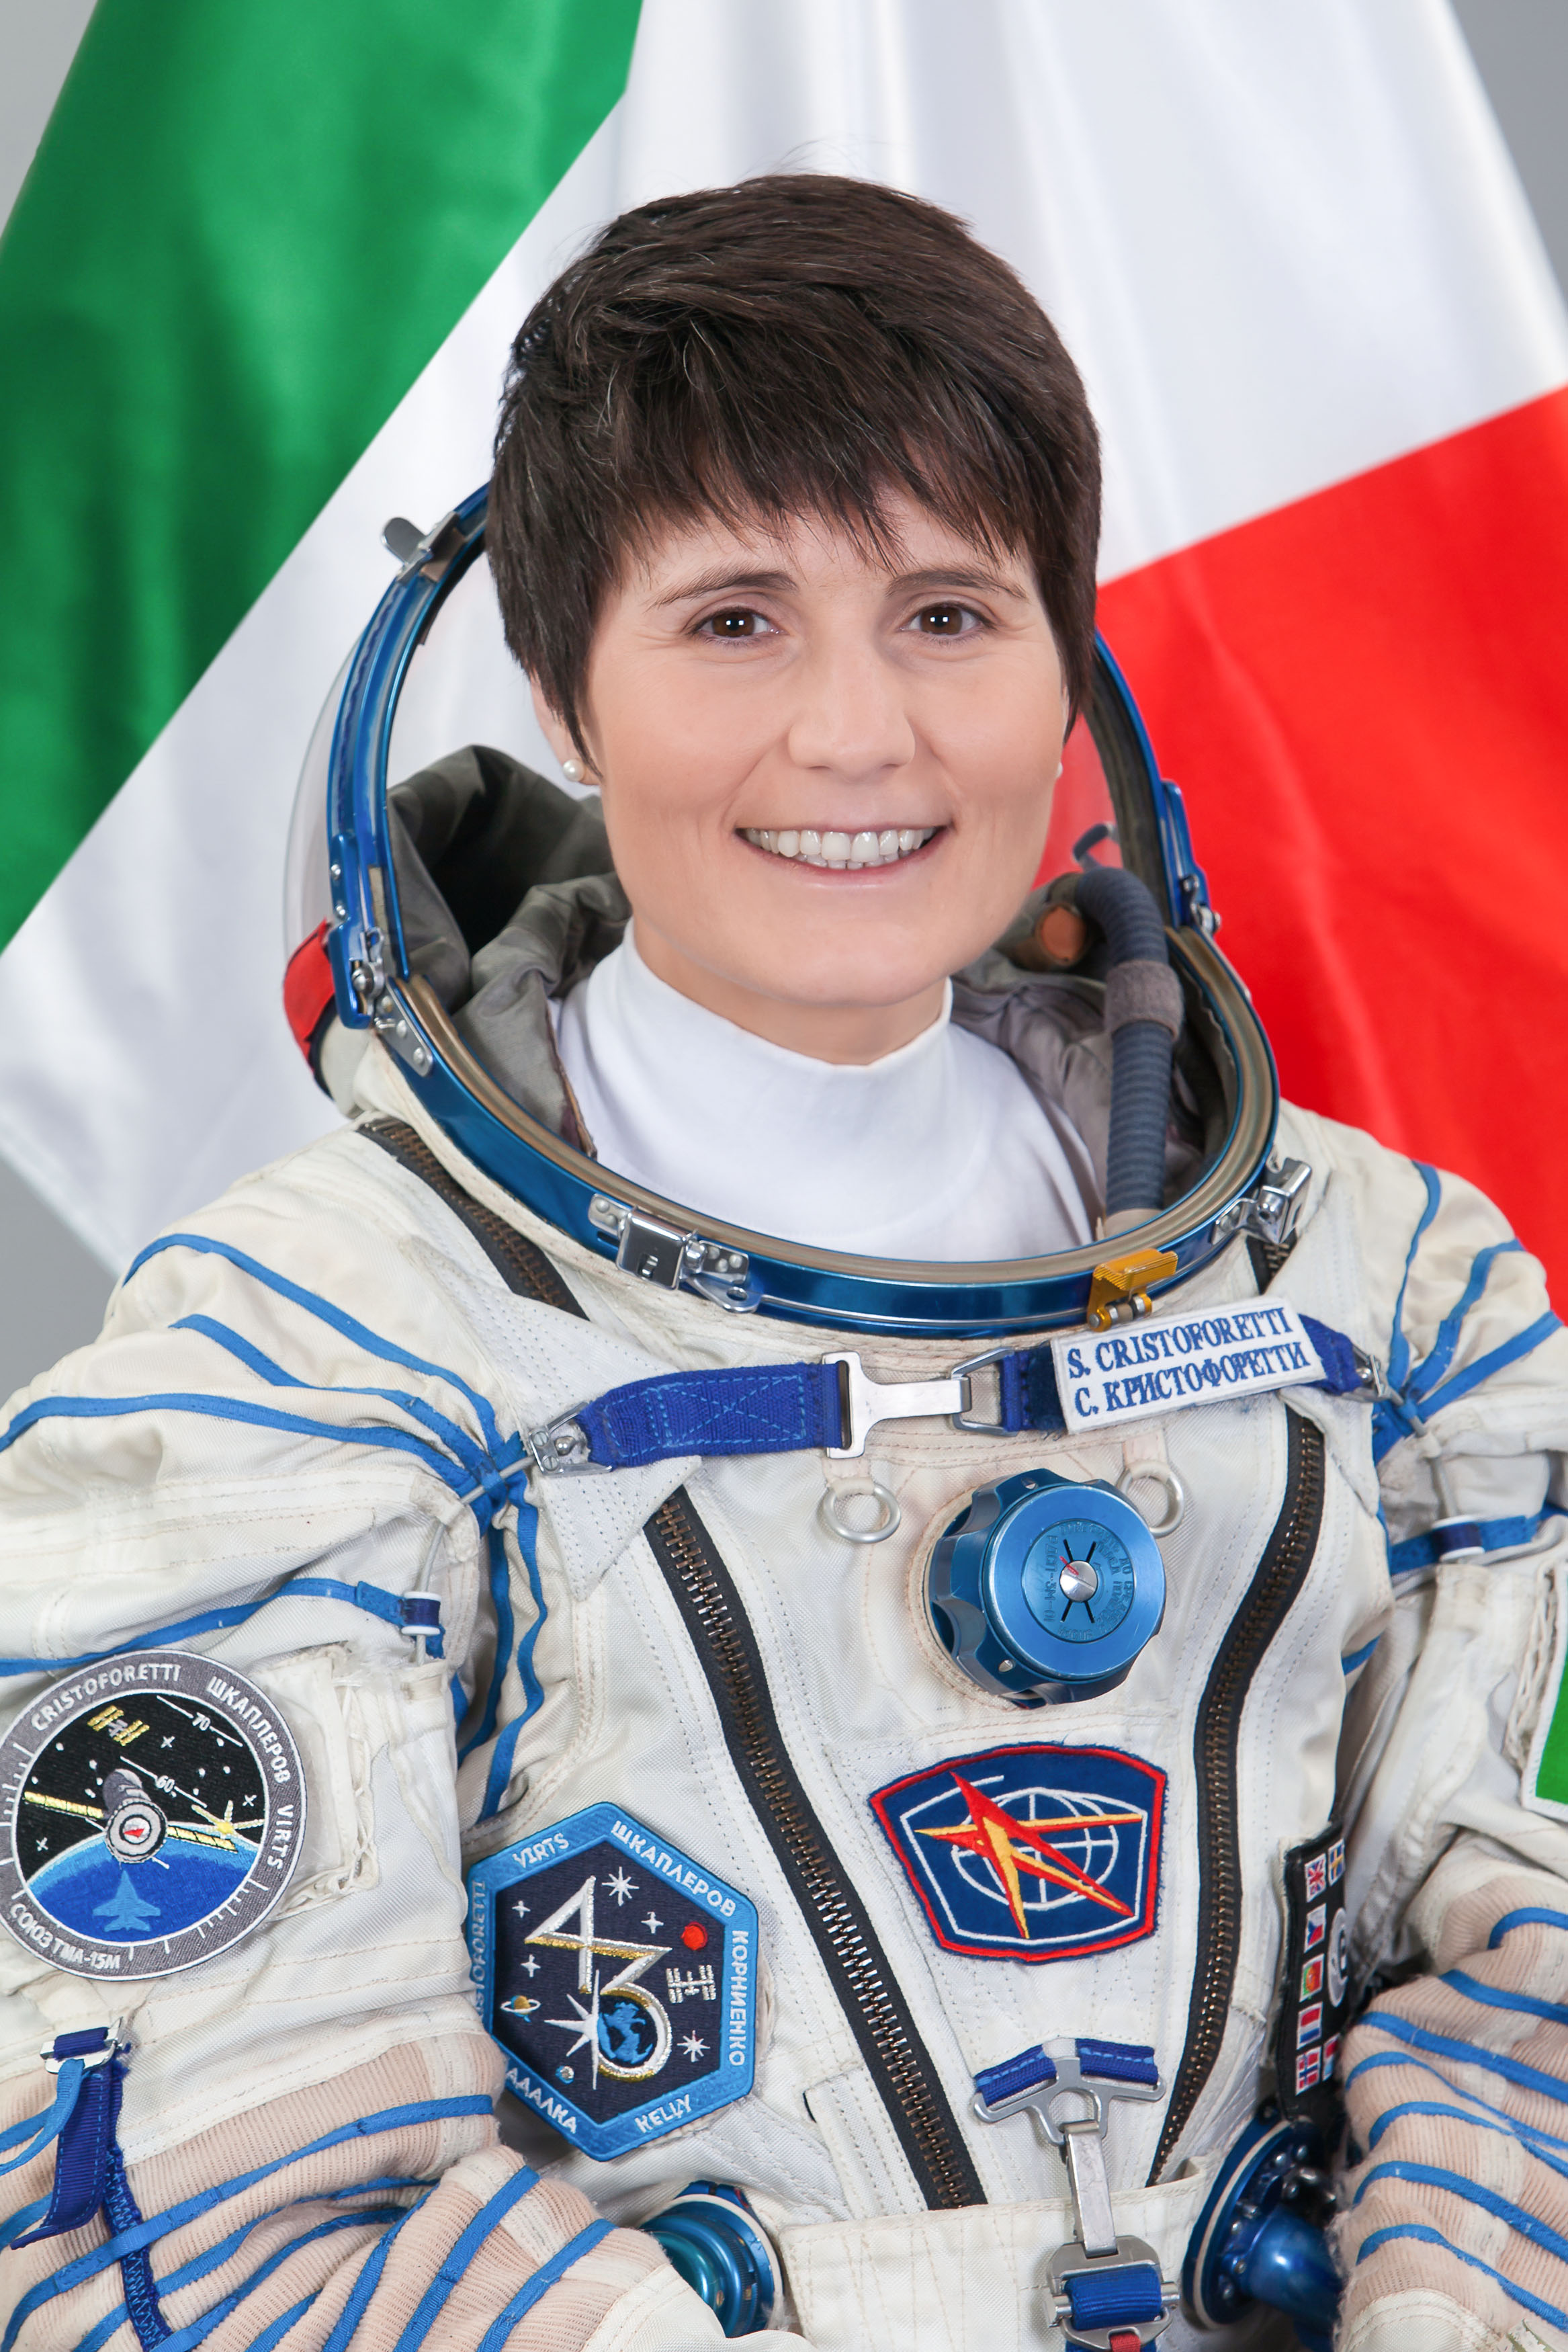 Official Crew Photograph of European Space Agency Astronaut Samantha Cristoforetti, Flight Engineer for Expedition 42 on the International Space Station. (NASA/JSC)